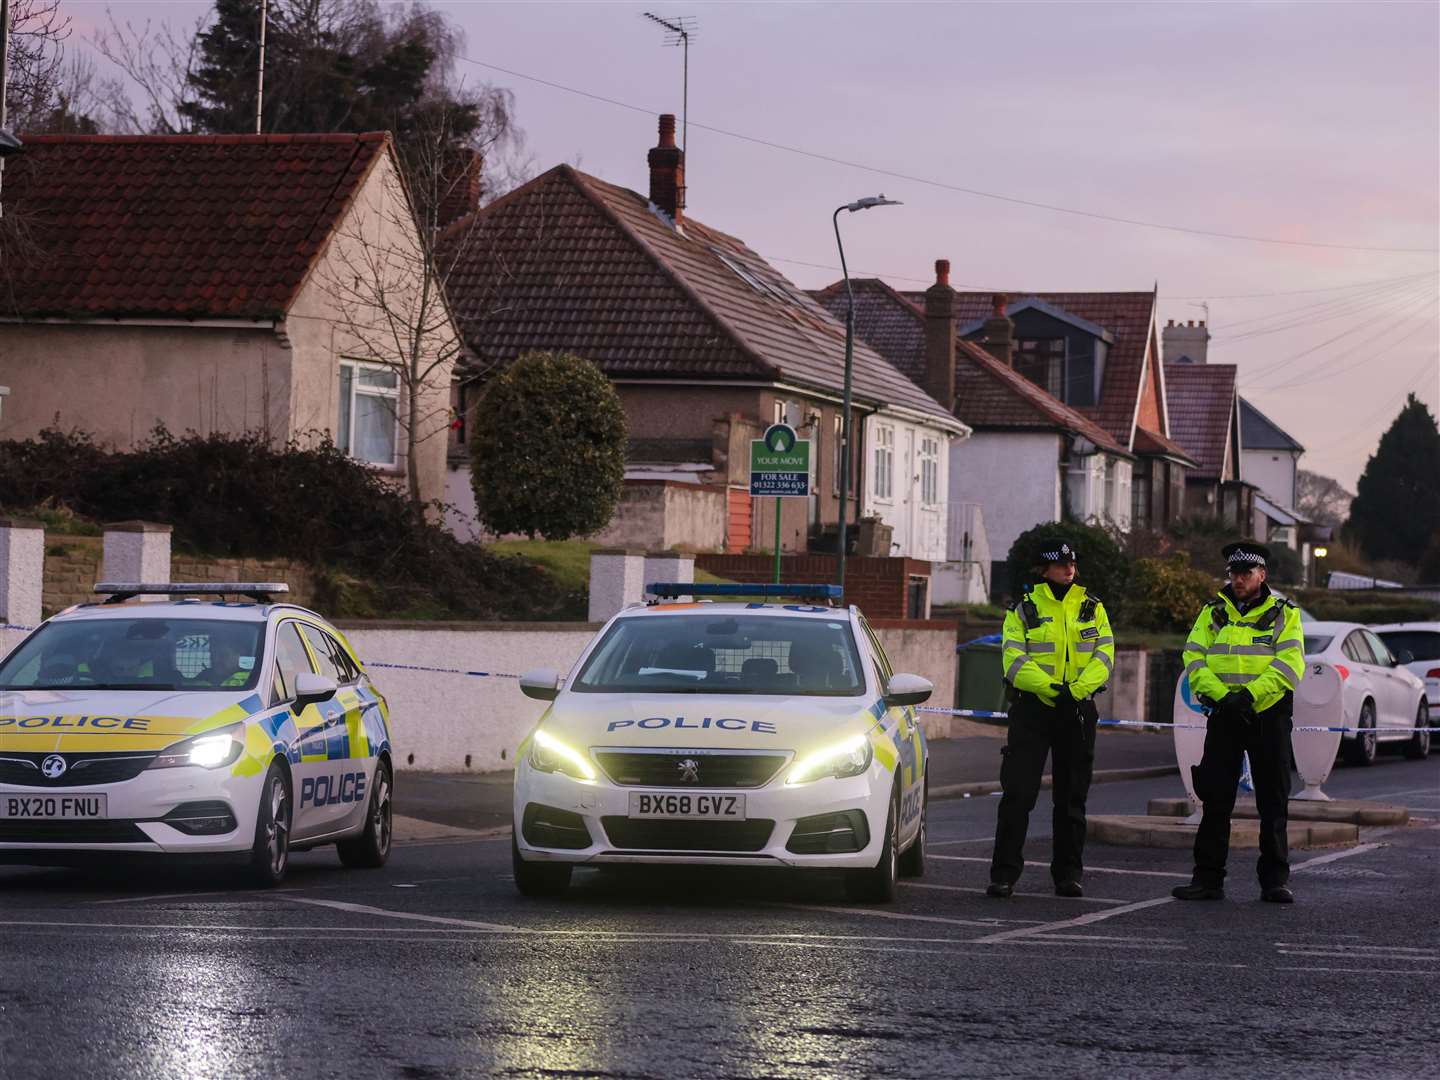 Four people have already been charged in connection to the incident. Picture: UKNIP